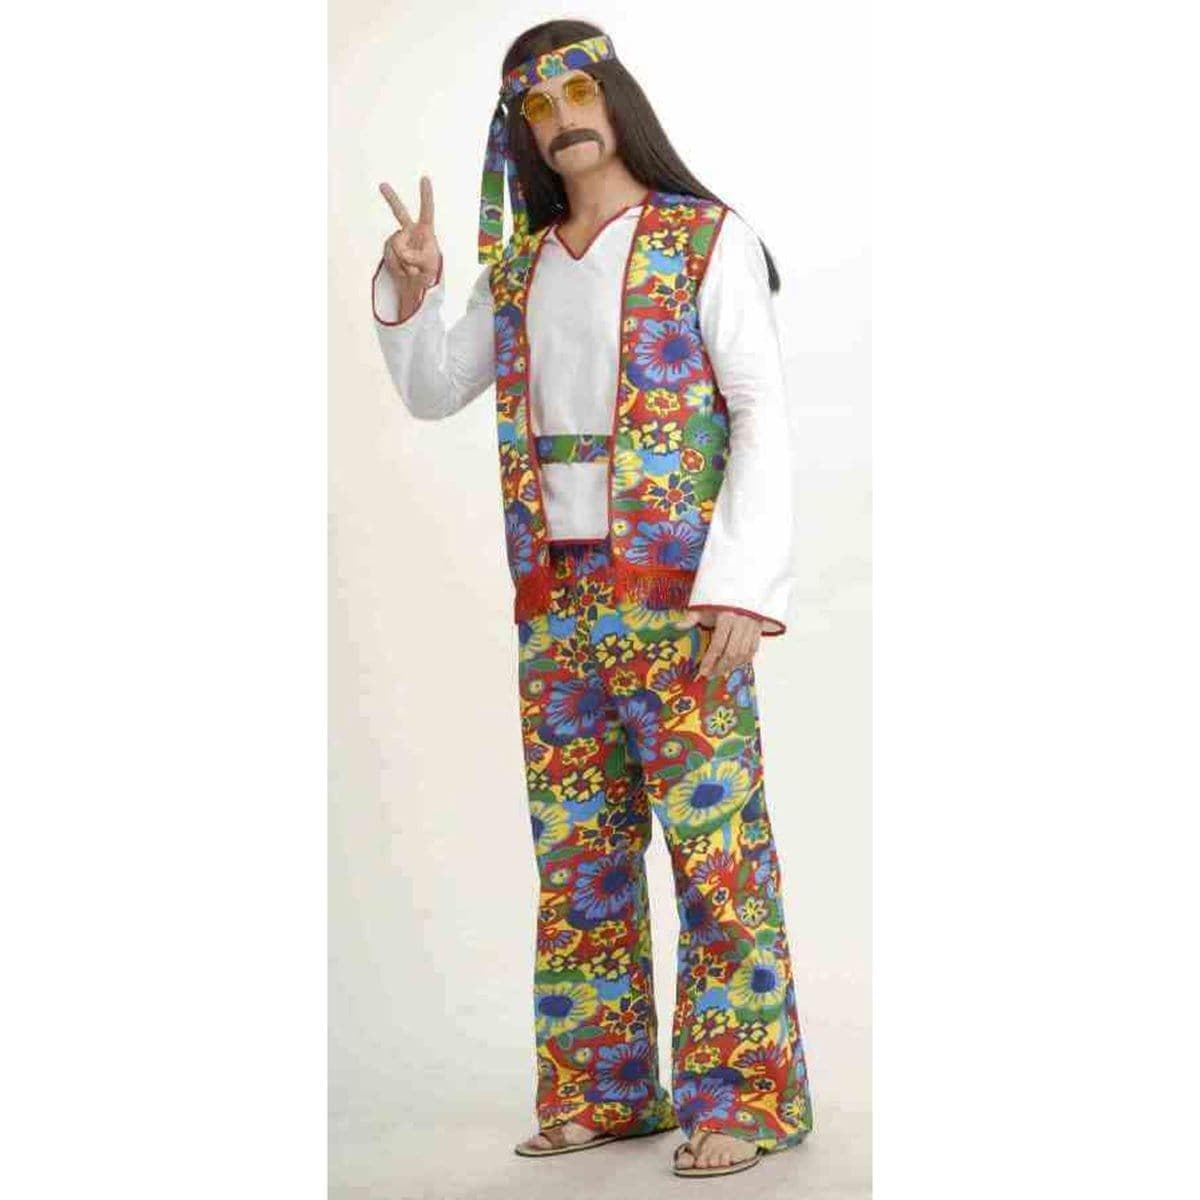 Buy Costumes Hippie Dippie Man Costume for Adults sold at Party Expert